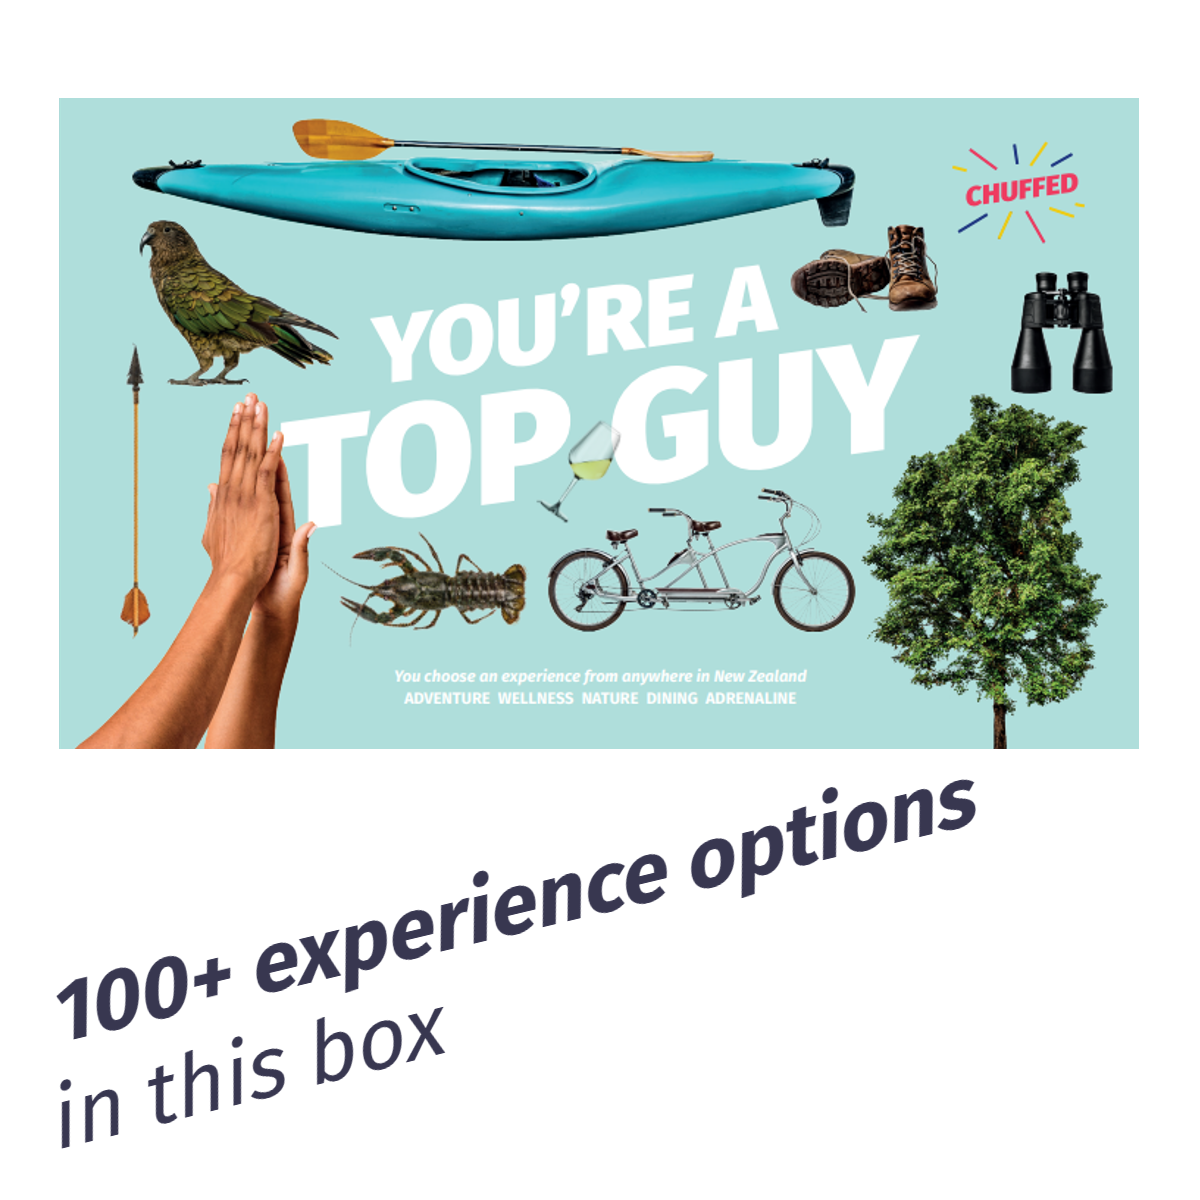 100+ experience options in this box